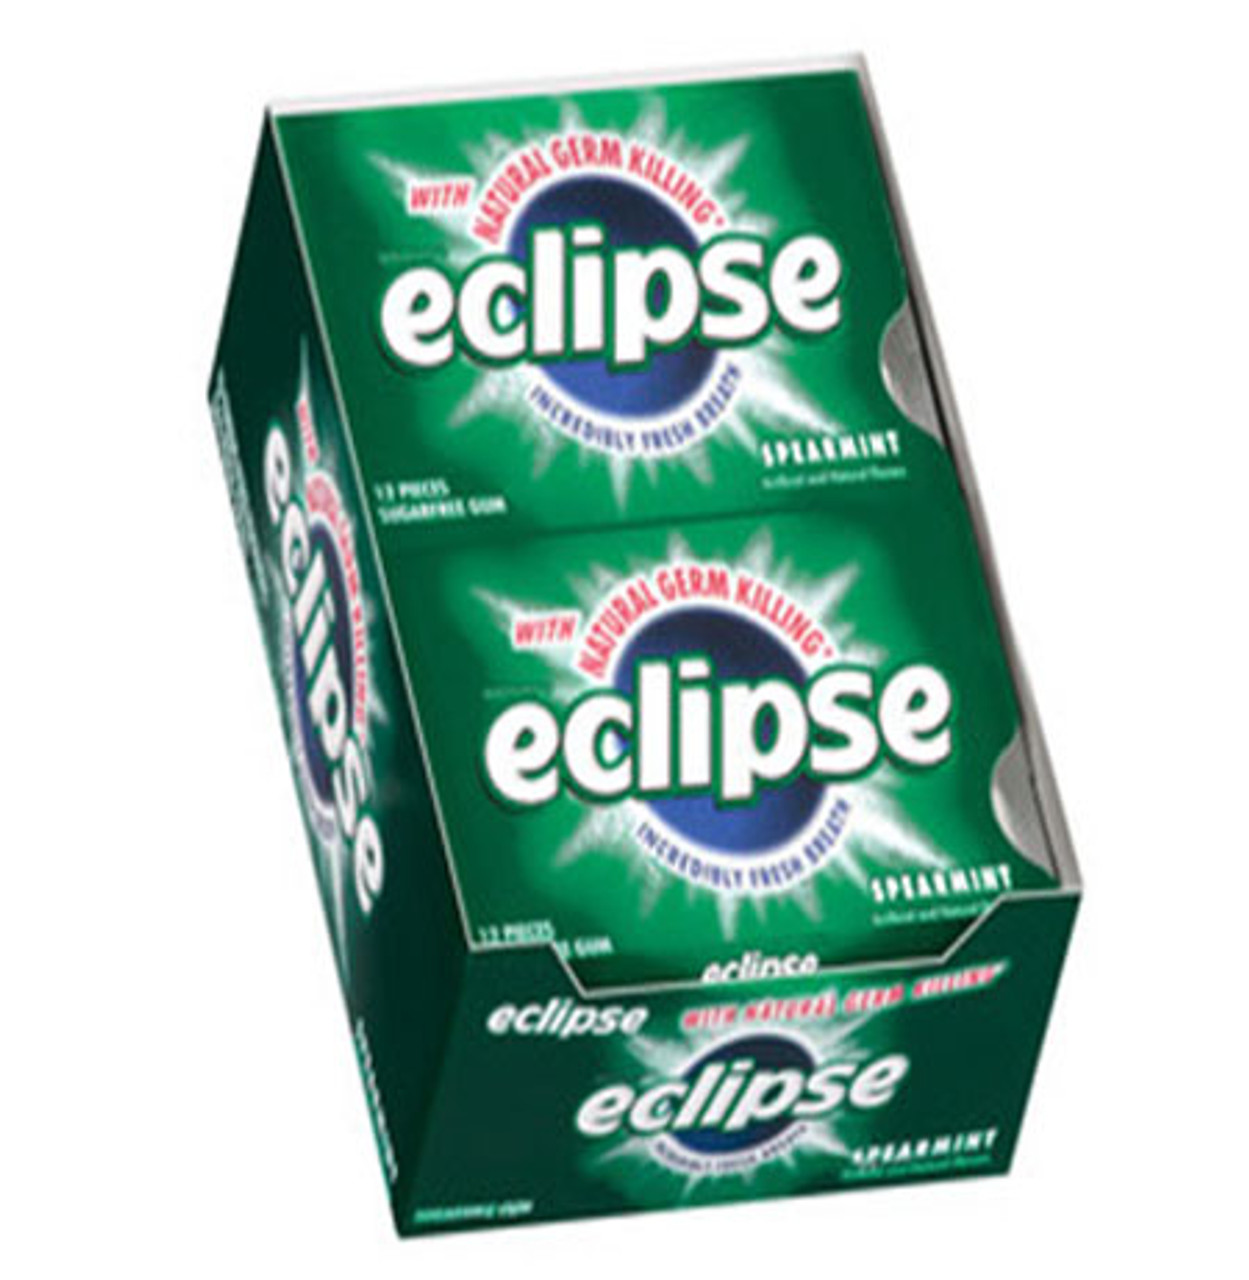 https://cdn11.bigcommerce.com/s-omwfd2x16c/images/stencil/1280x1280/products/6291/7064/eclipse-sugarless-gum-8ct-spearmint-39__87715.1623945053.jpg?c=1